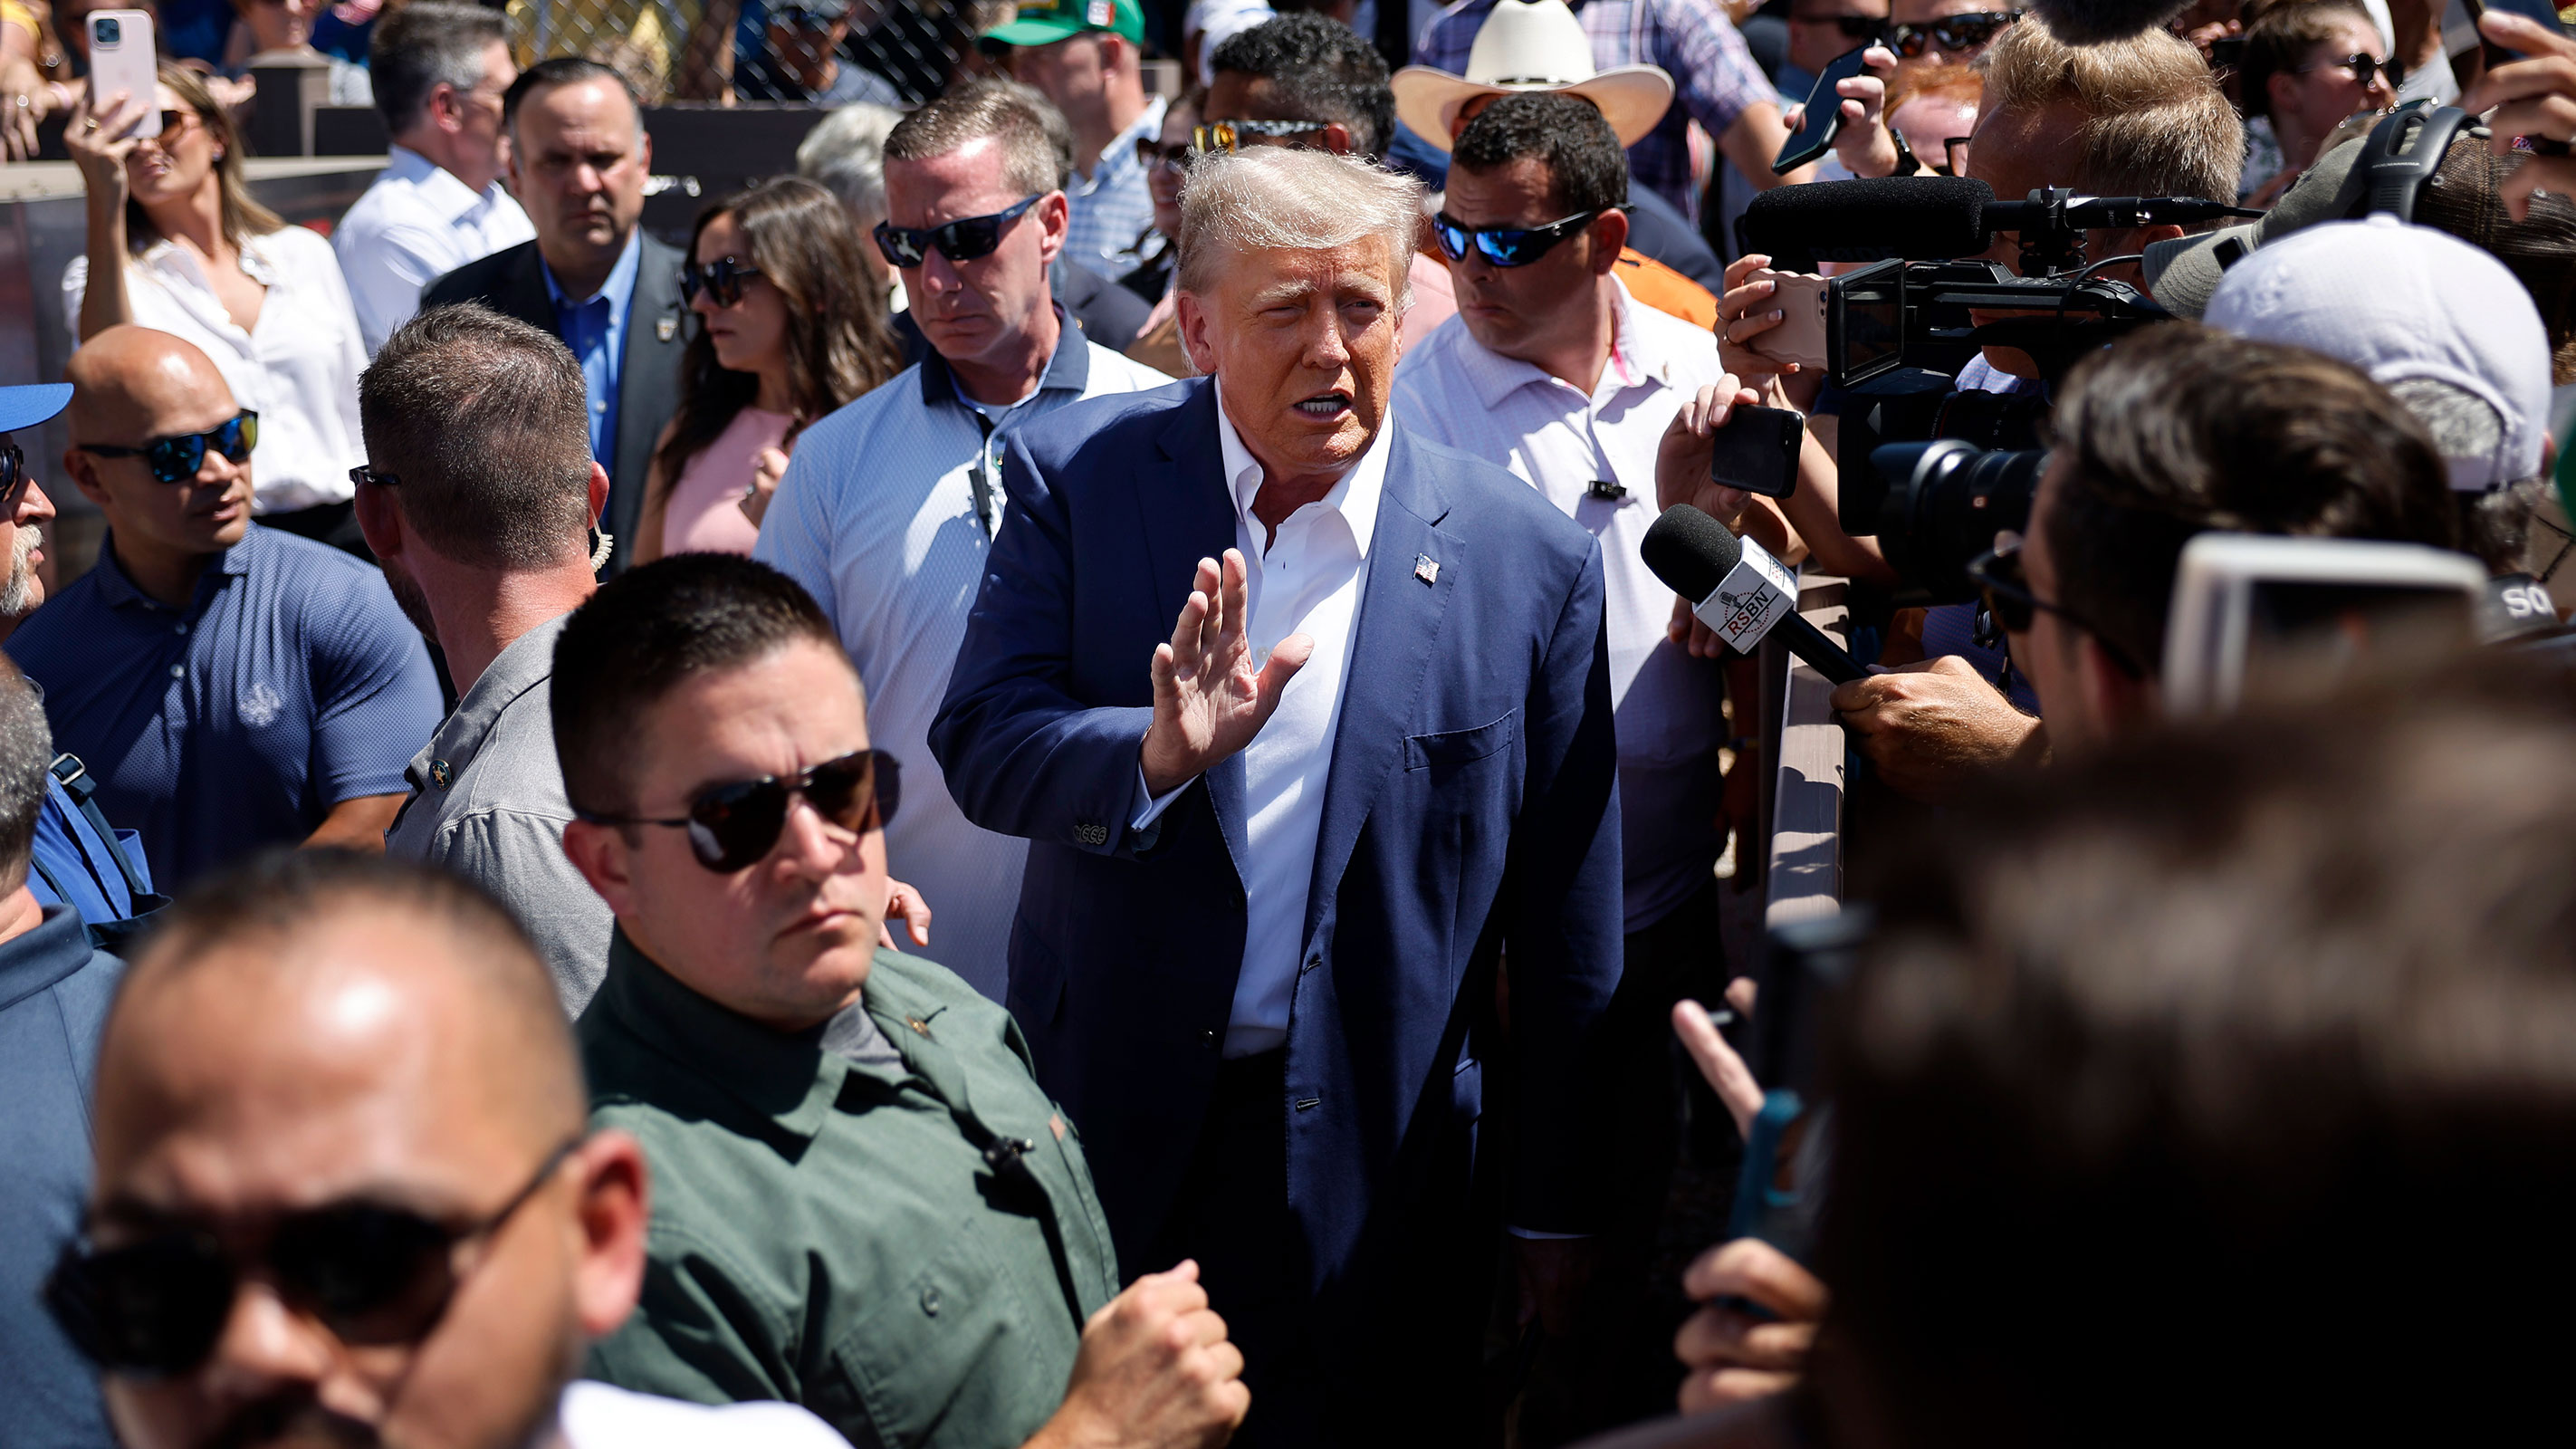 Surrounded by campaign staff and members of the US Secret Service, former President Donald Trump waves to supporters as he visits the Iowa Pork Producers Tent at the Iowa State Fair on August 12, 2023 in Des Moines, Iowa. 